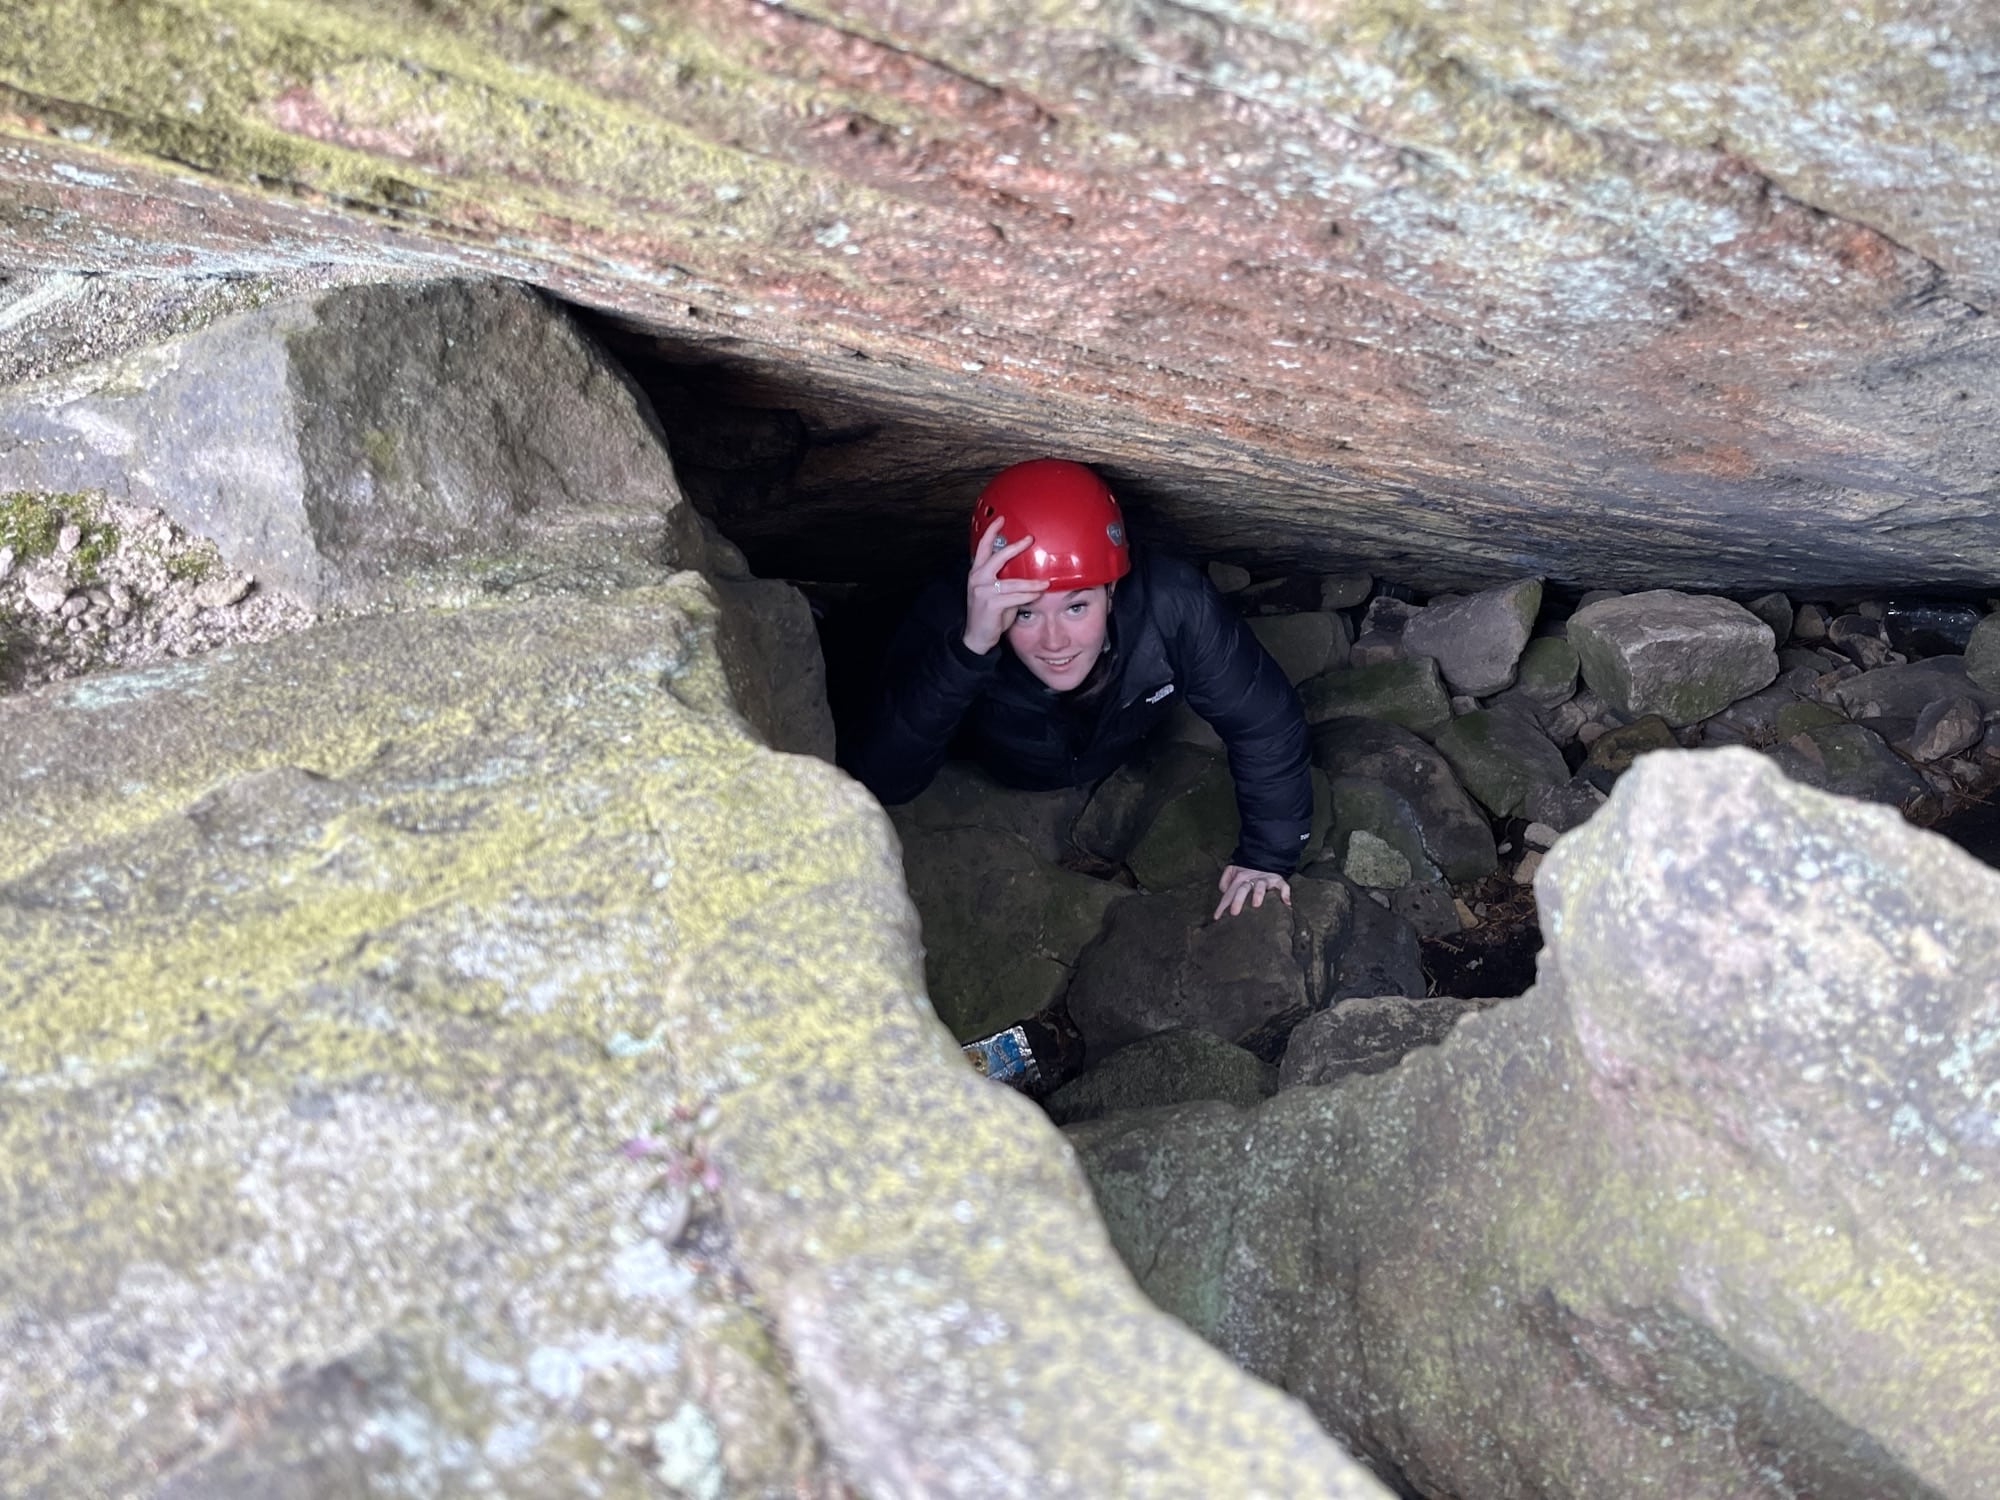 UPS students take part in Peak District challenge - Student exploring cave